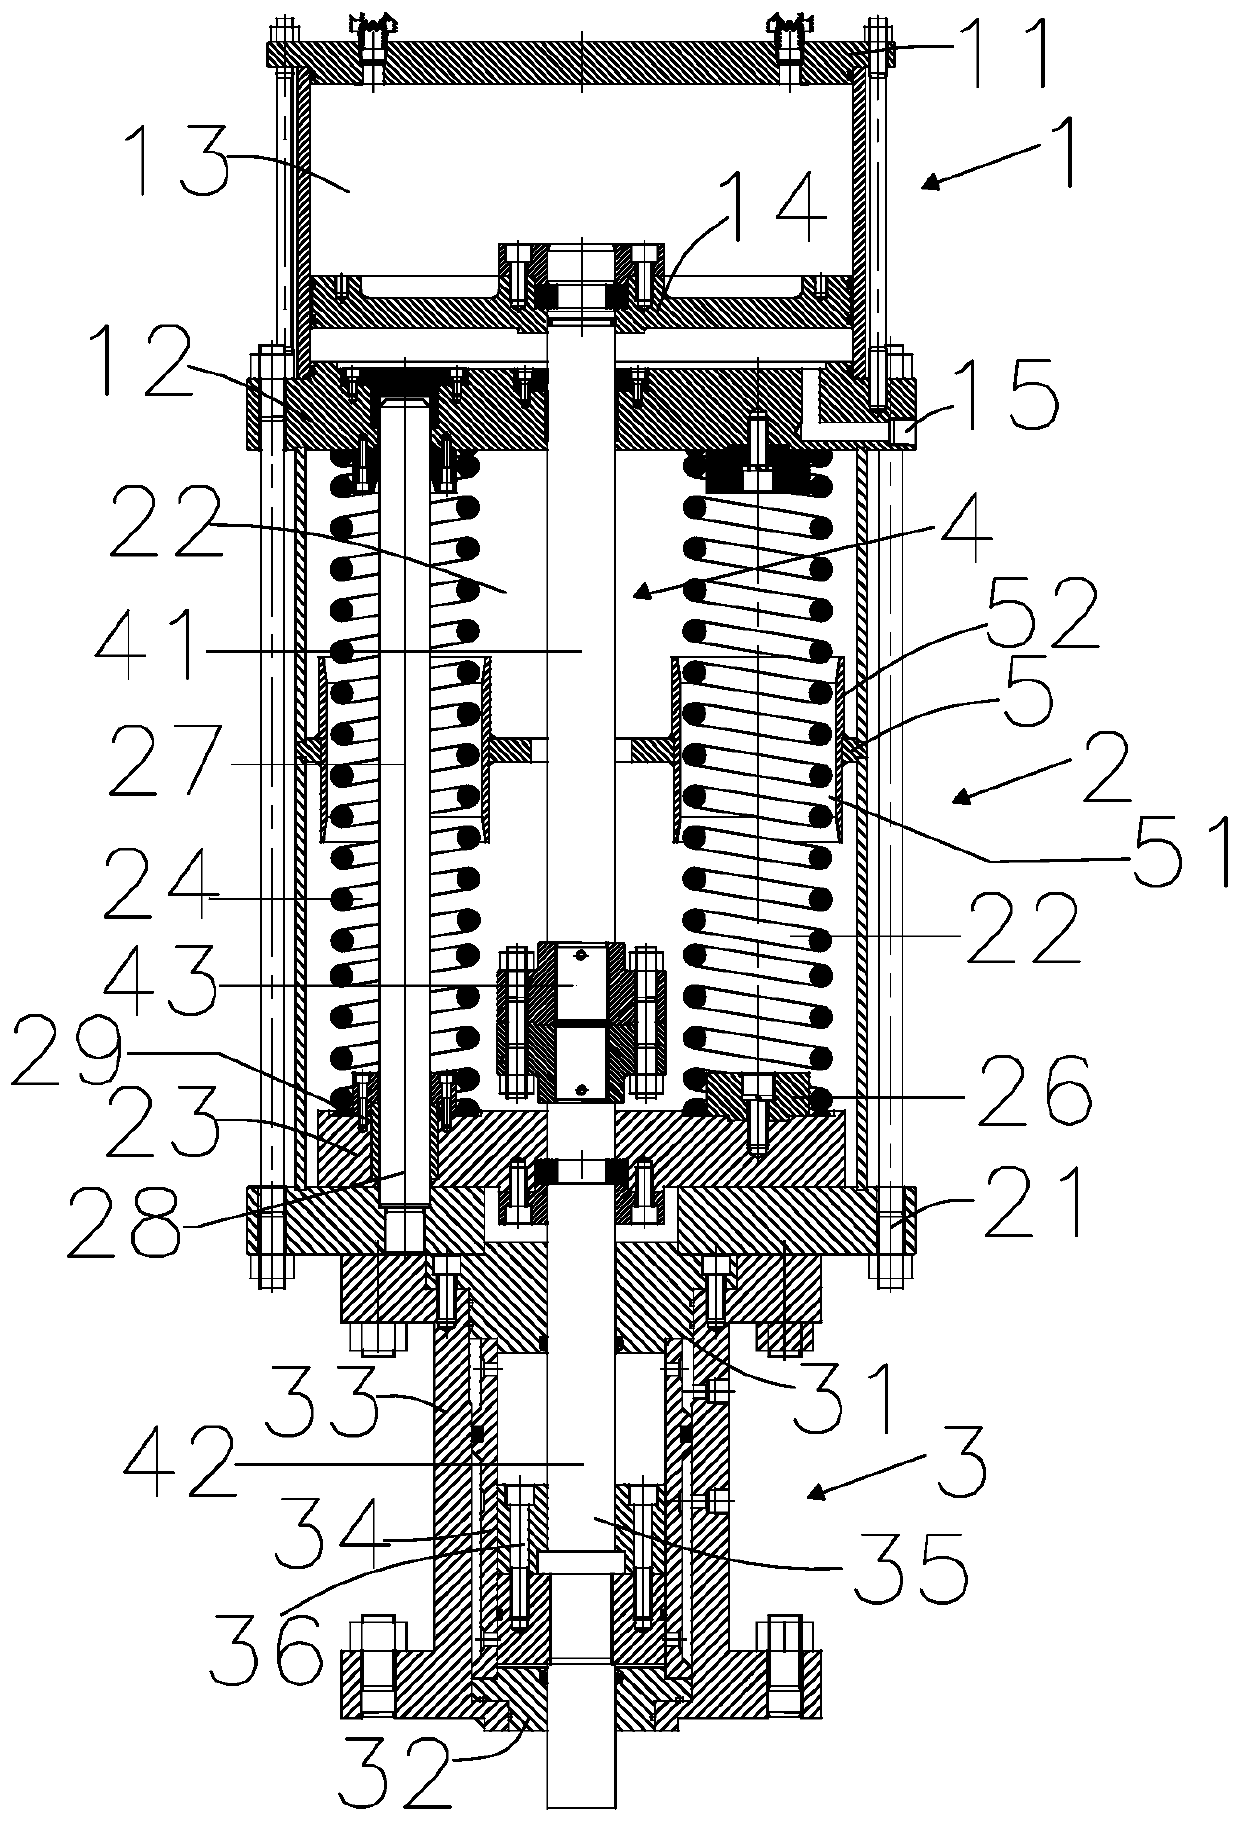 Execution mechanism for safety shut-off valve